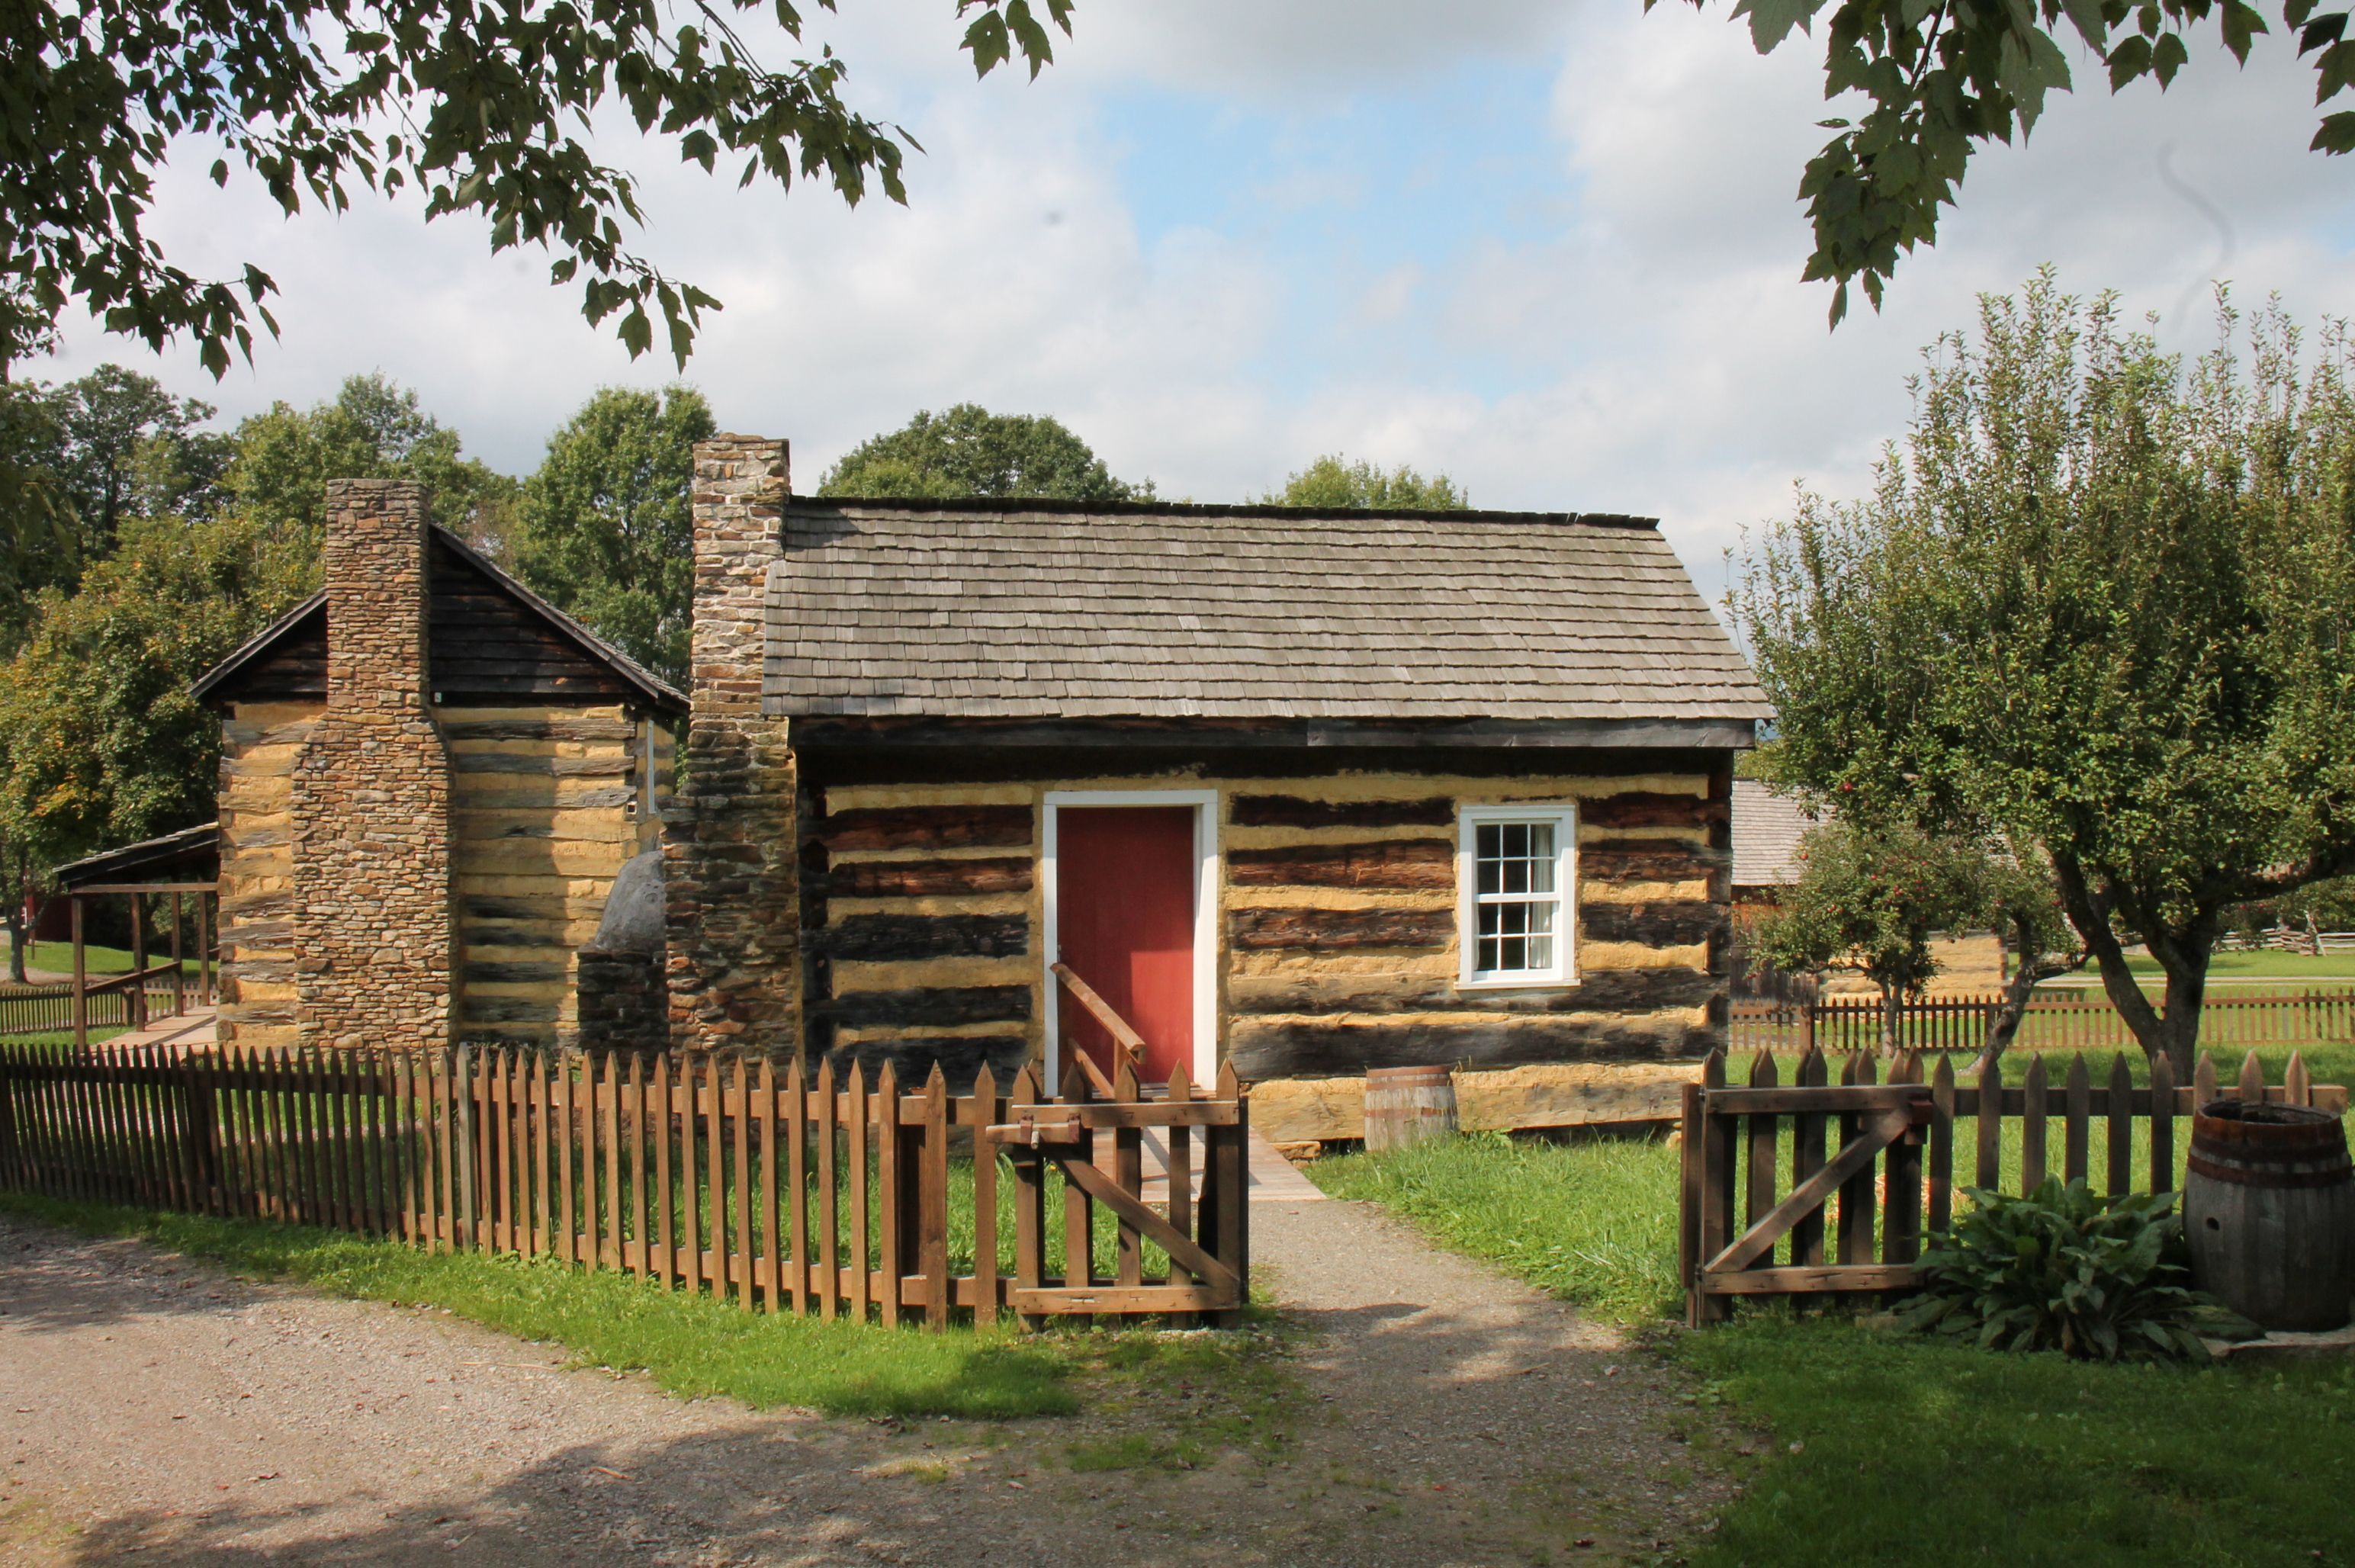 Explore Pennsylvania's Past with Free Admission to PA Trails of History Sites and Museums on Saturday, September 24